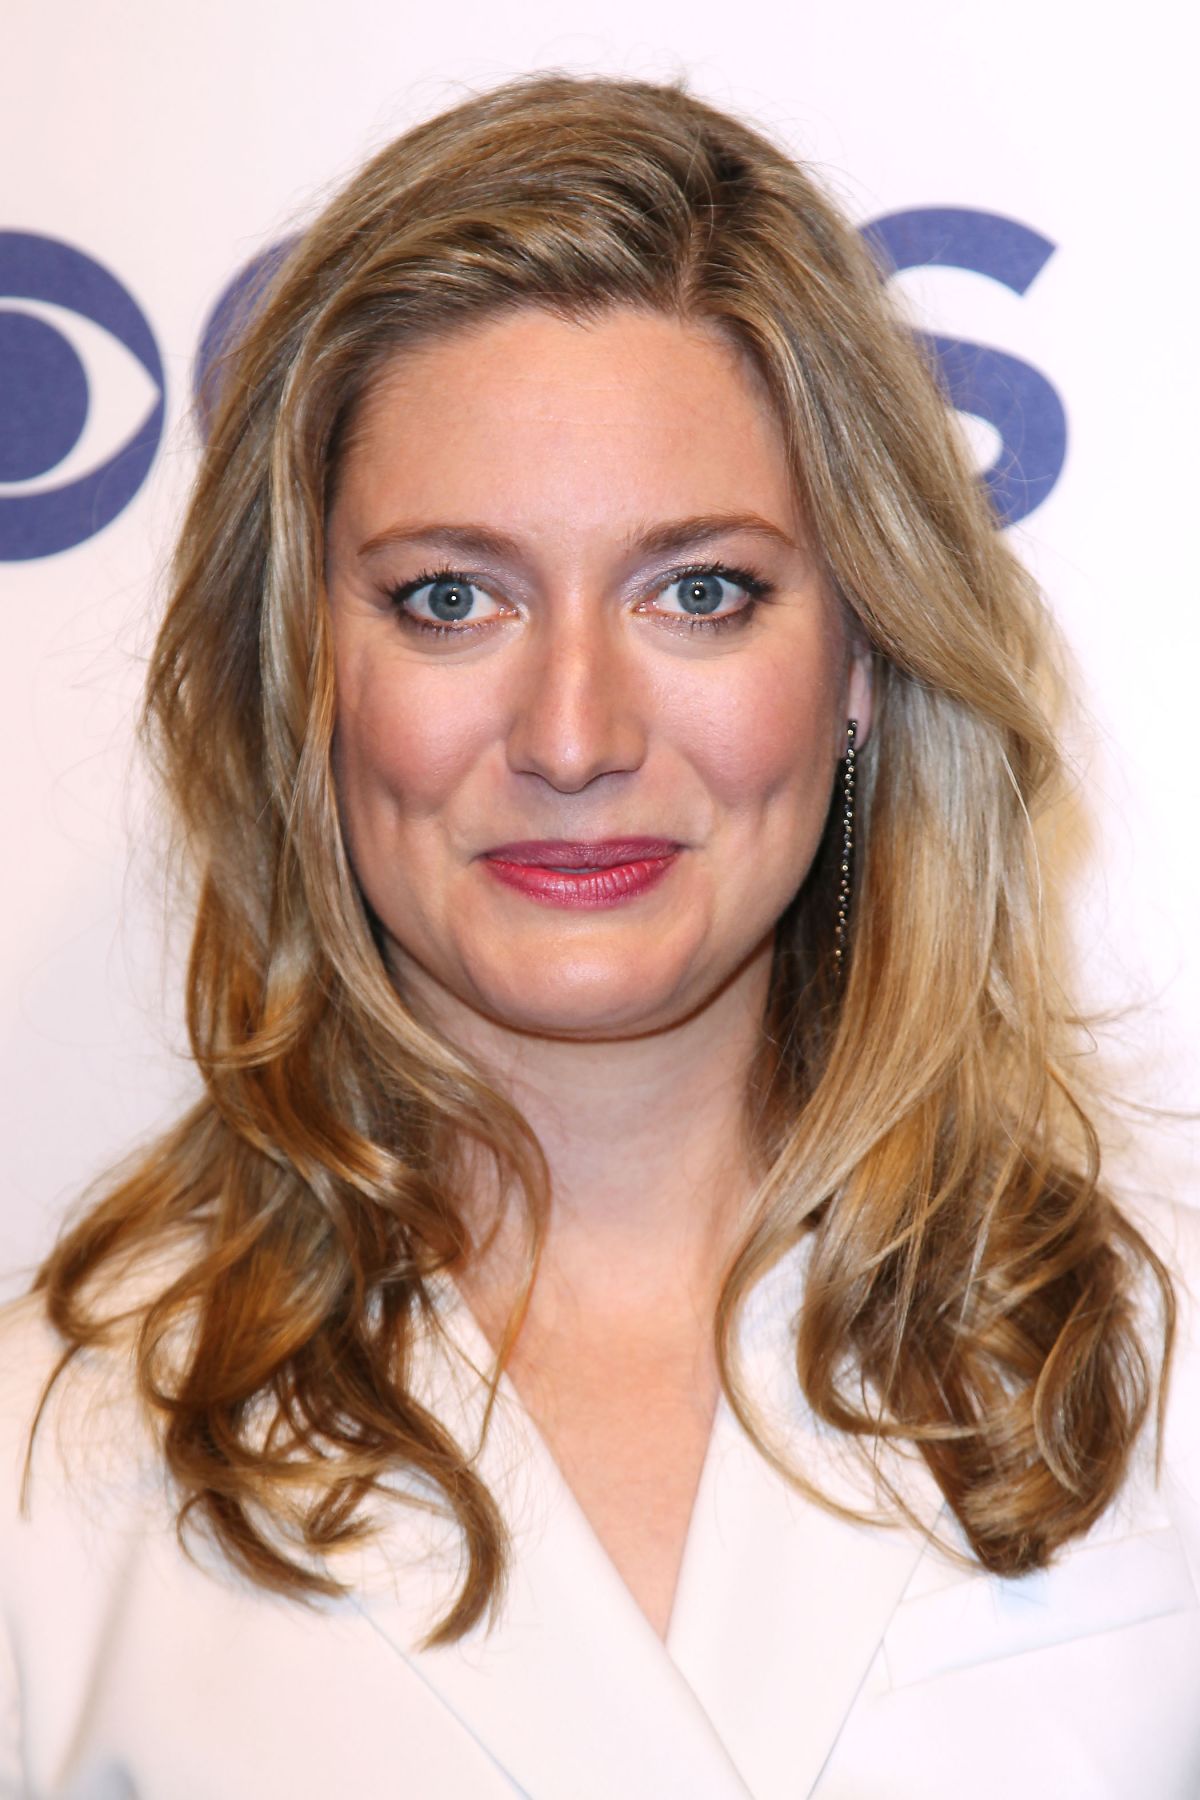 ZOE PERRY at CBS Upfront Presentation in New York 05/16/2018. 